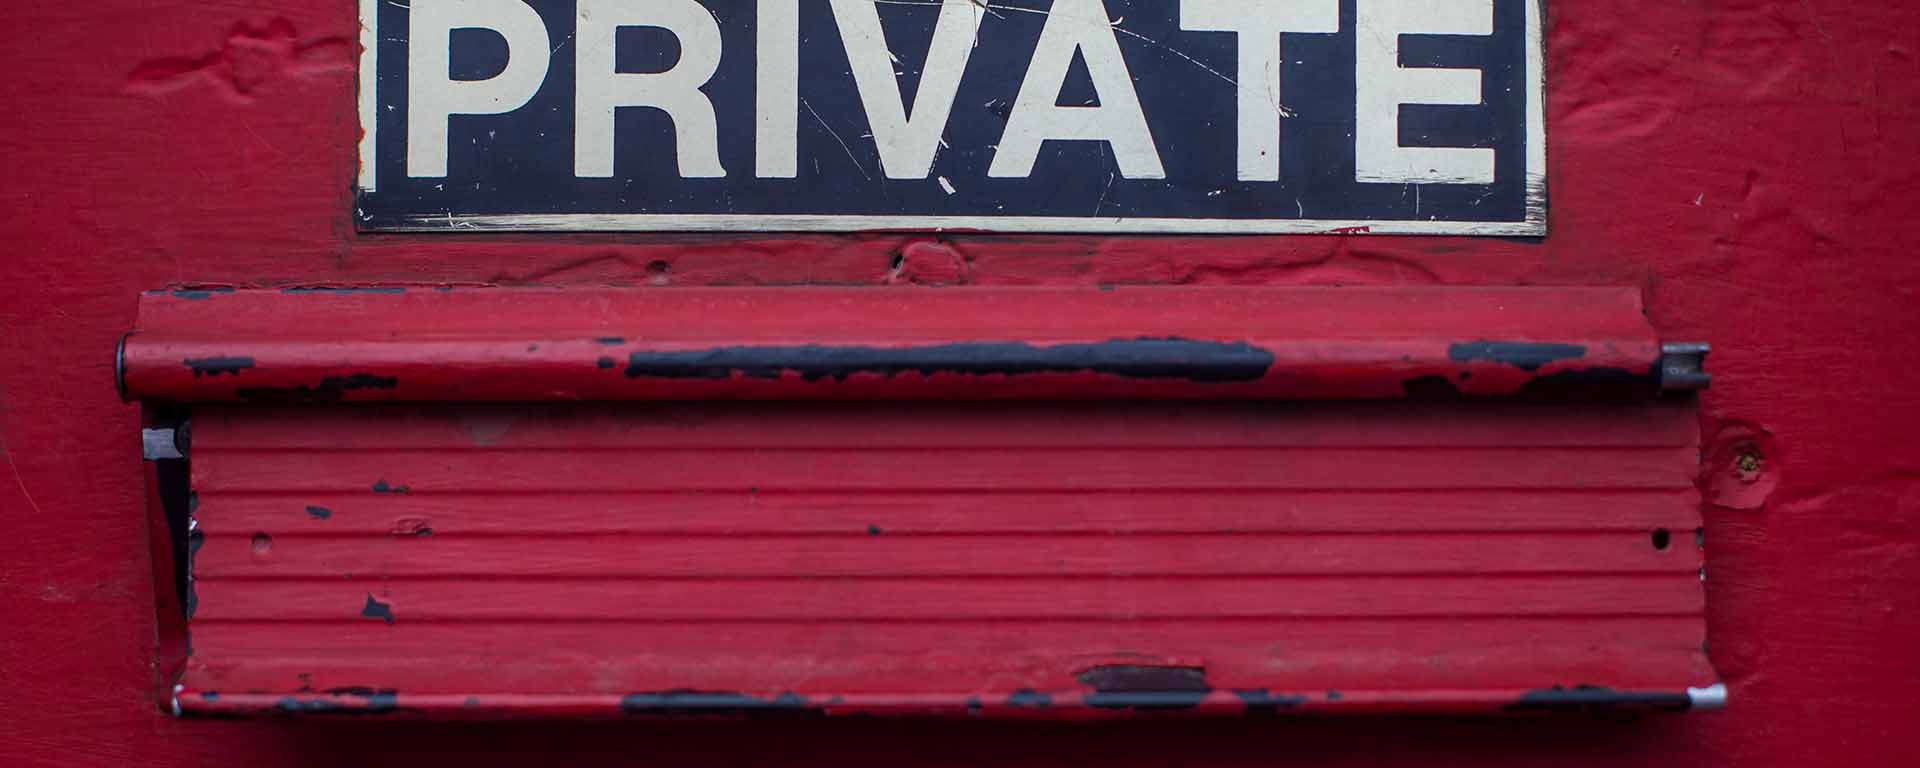 A red door with letterbox, Sign above says "Private"